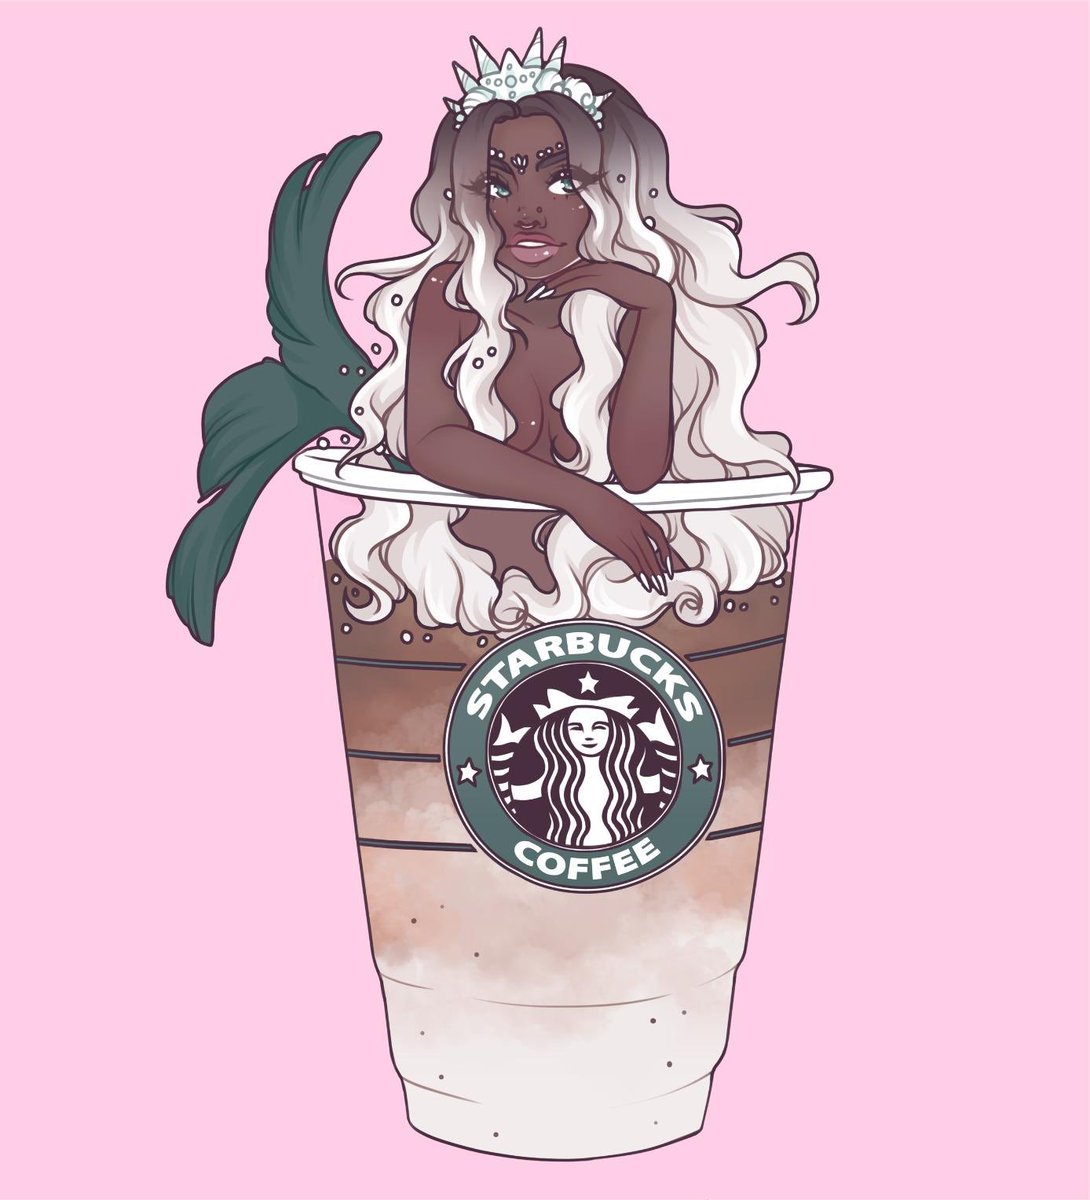 Iced coffee ☕️✨
Decided to redraw another mermaid from last year!
#pantonemermay #mermay